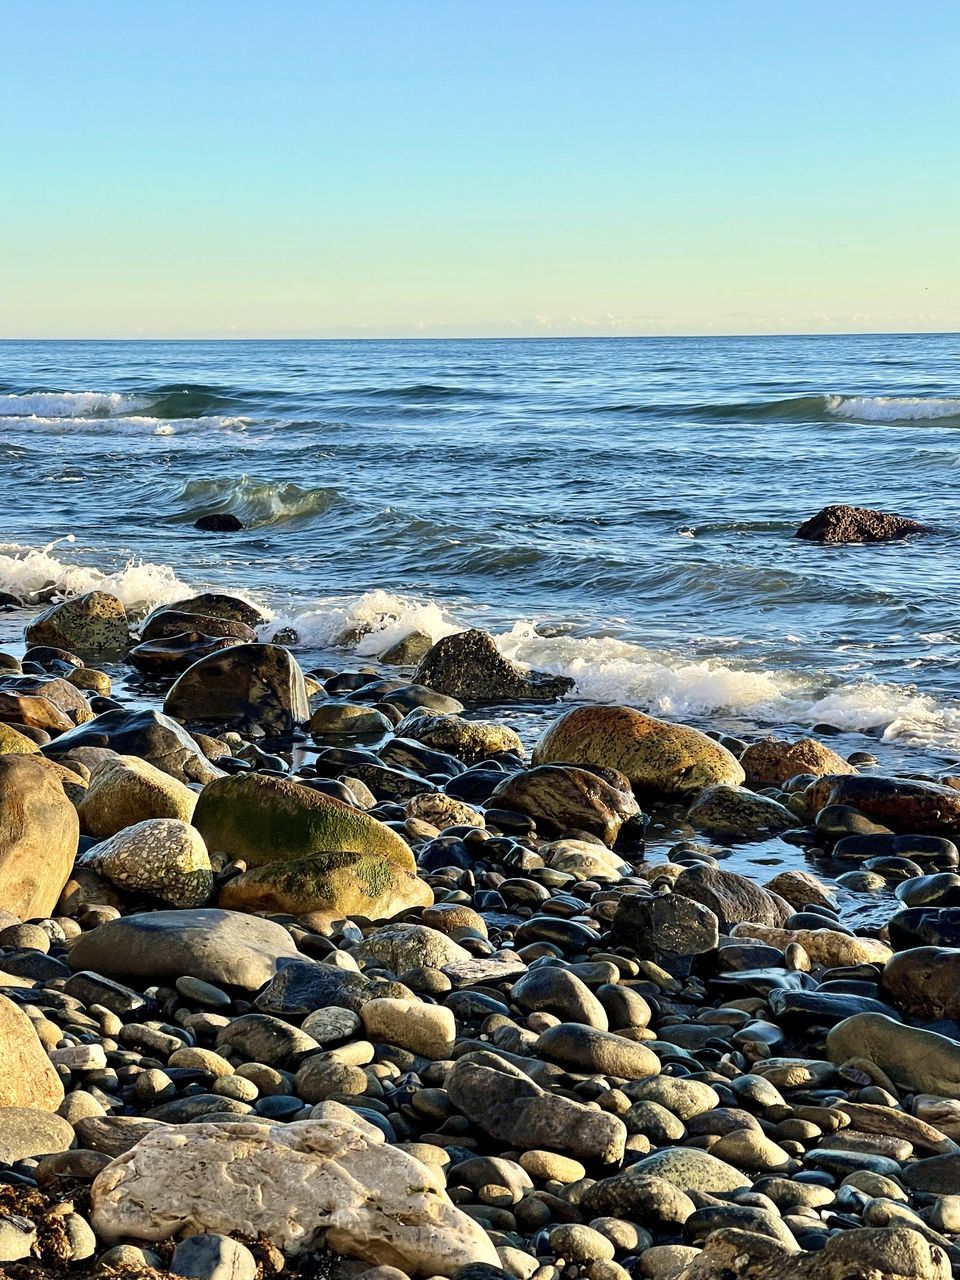 sea, water, rock, beach, land, body of water, shore, sky, nature, beauty in nature, horizon over water, scenics - nature, horizon, ocean, coast, tranquility, wave, tranquil scene, stone, clear sky, sand, no people, pebble, motion, idyllic, day, outdoors, sunlight, wind wave, seascape, coastline, non-urban scene, travel destinations